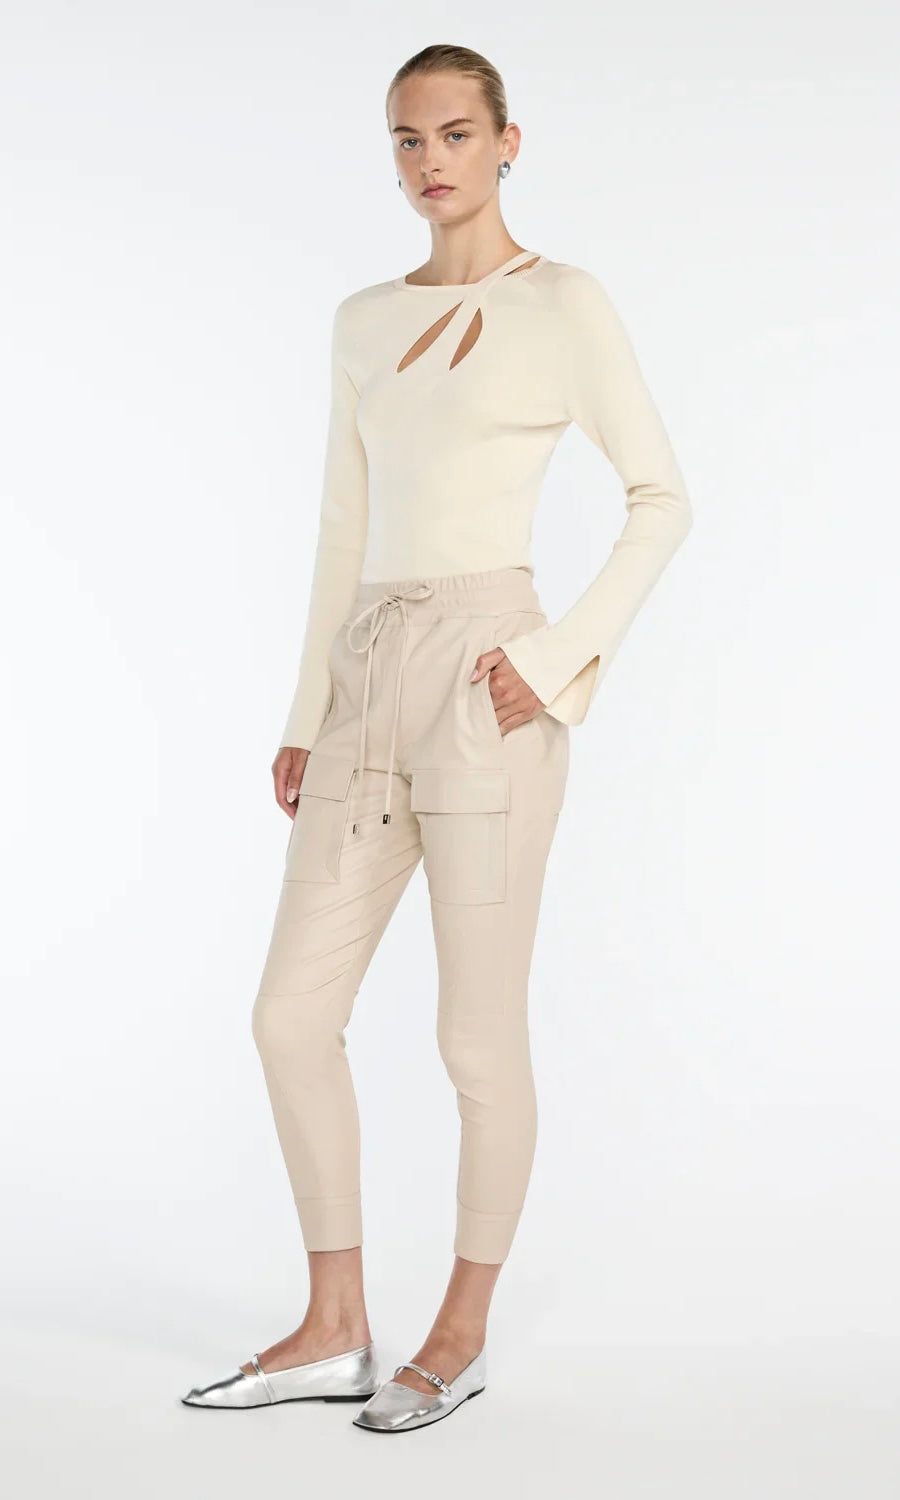 Manning Cartell Future Path Knit Top In Nougat